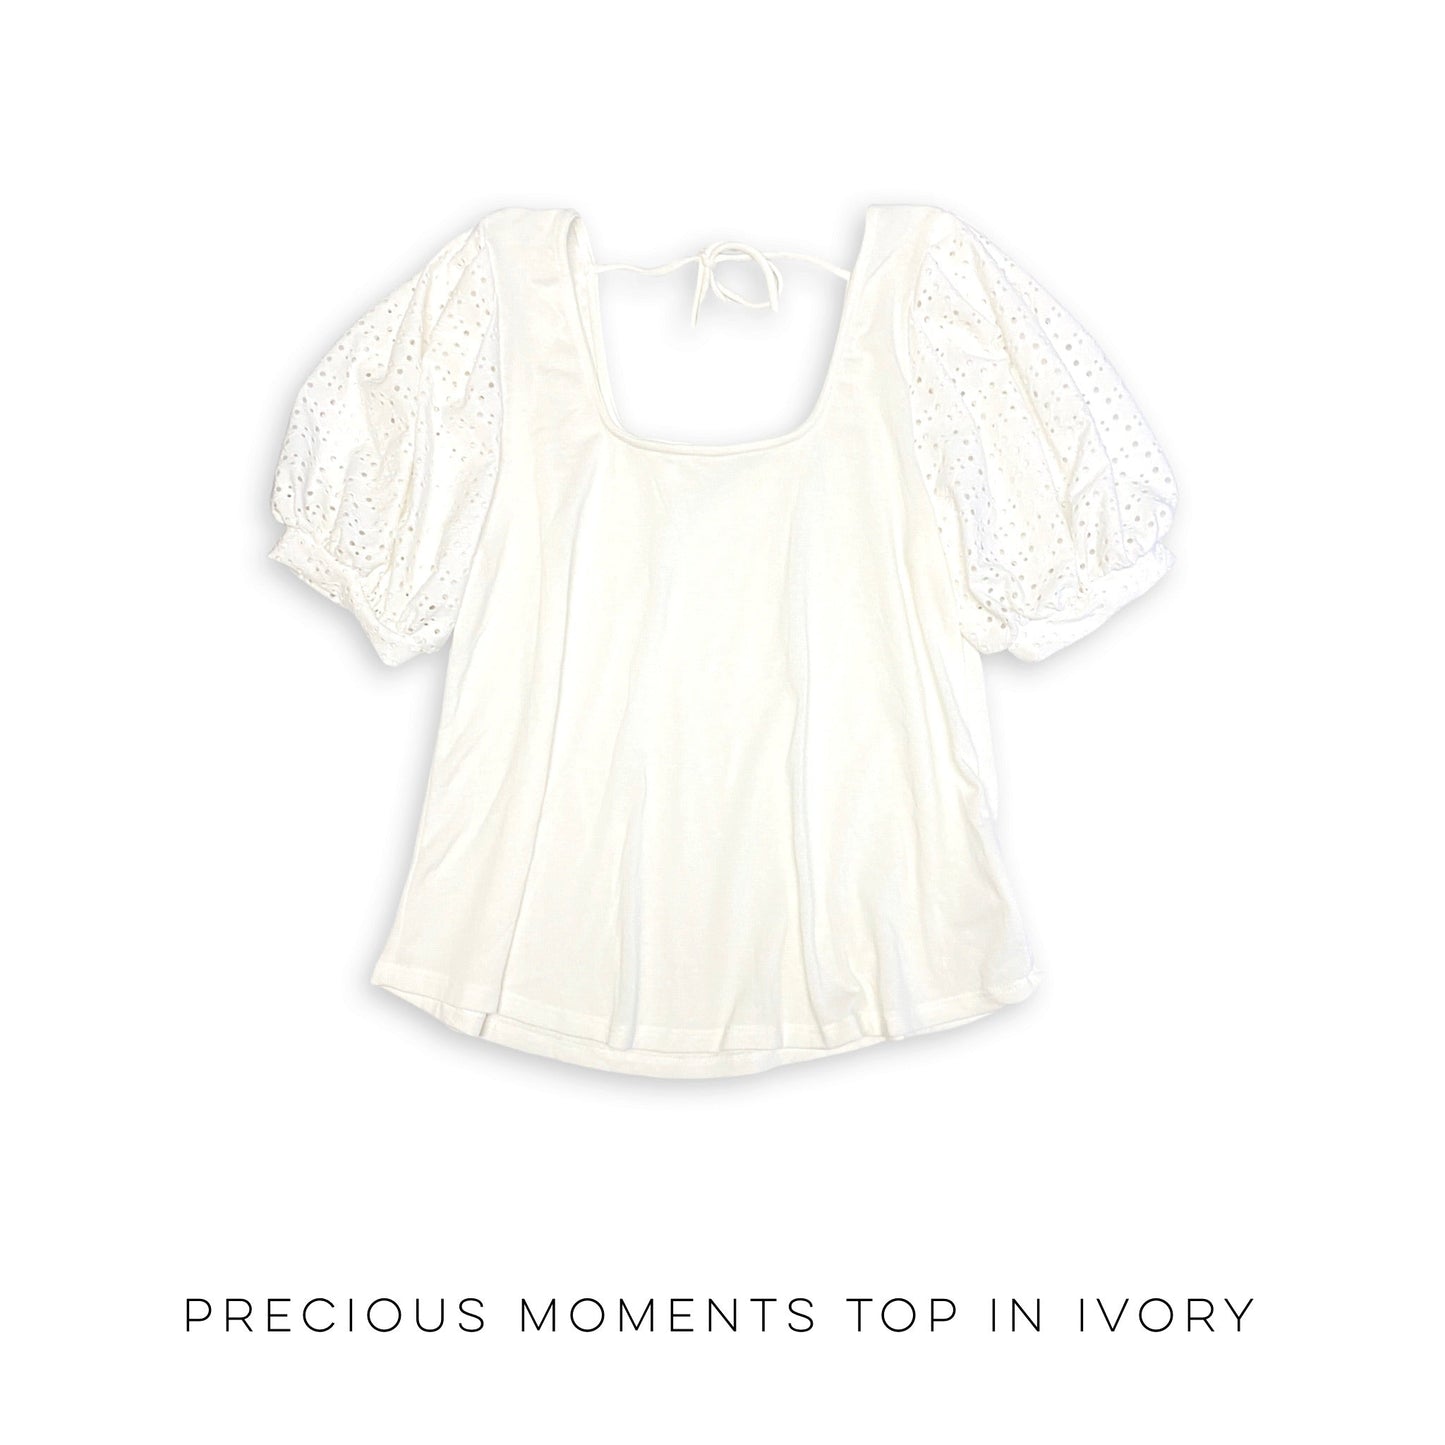 Precious Moments Top in Ivory